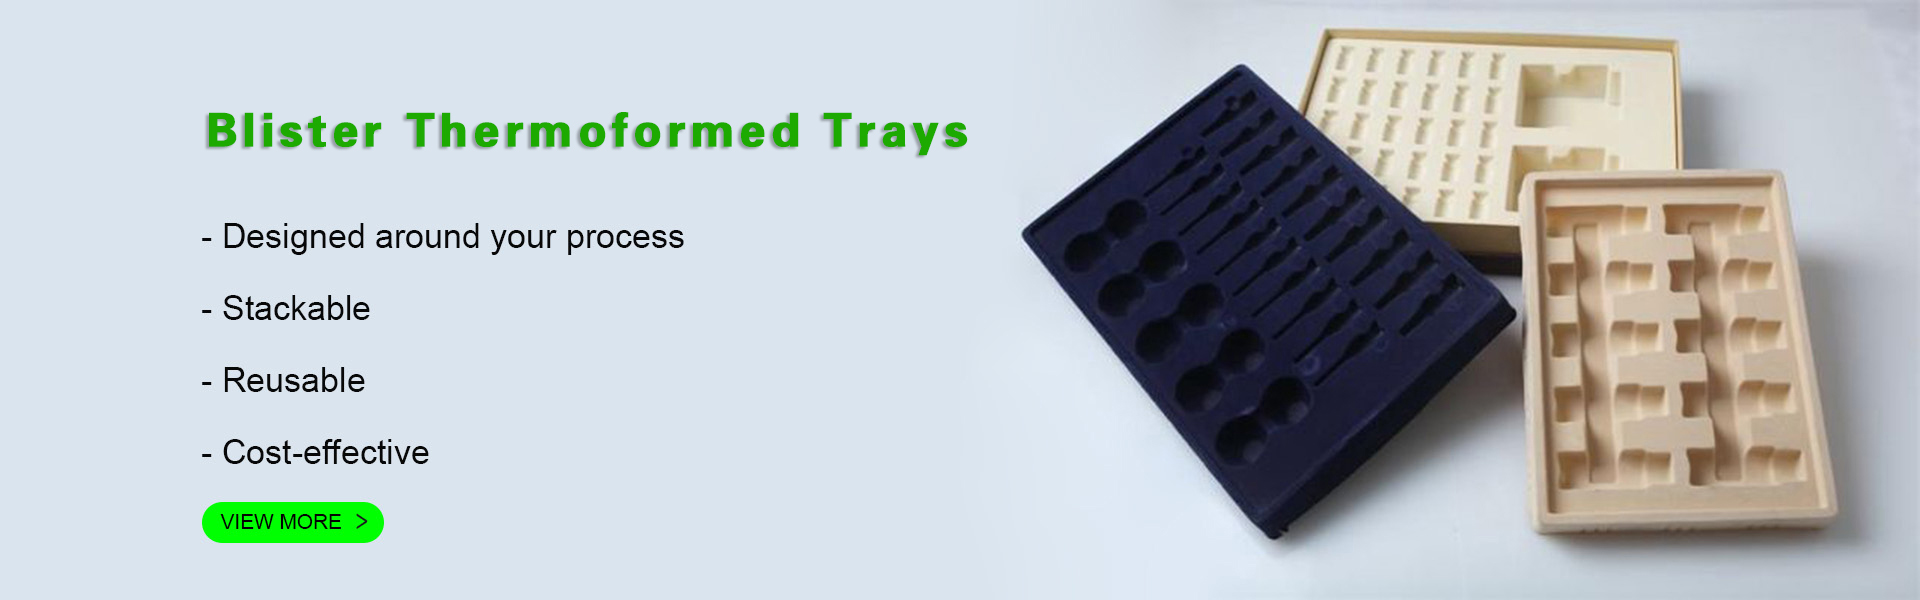 Blister Thermoformed Trays